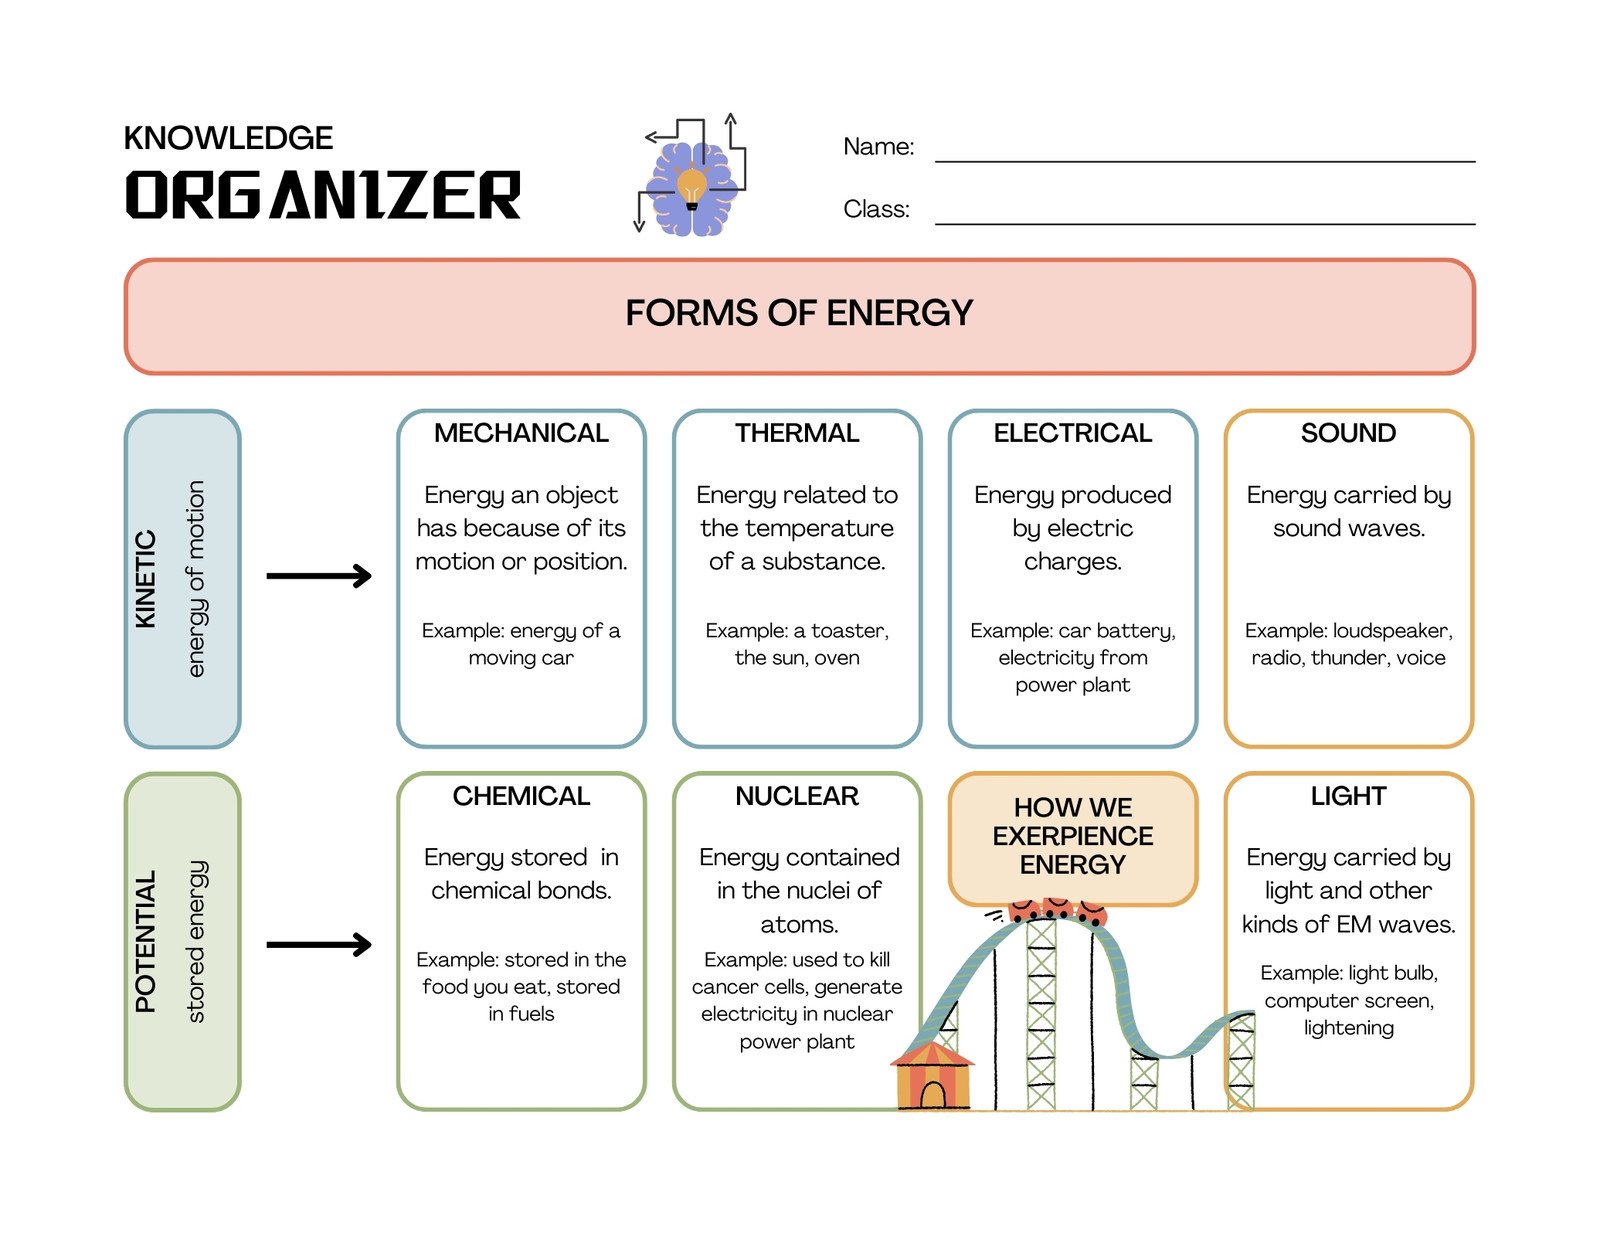 types of graphic organizers powerpoint